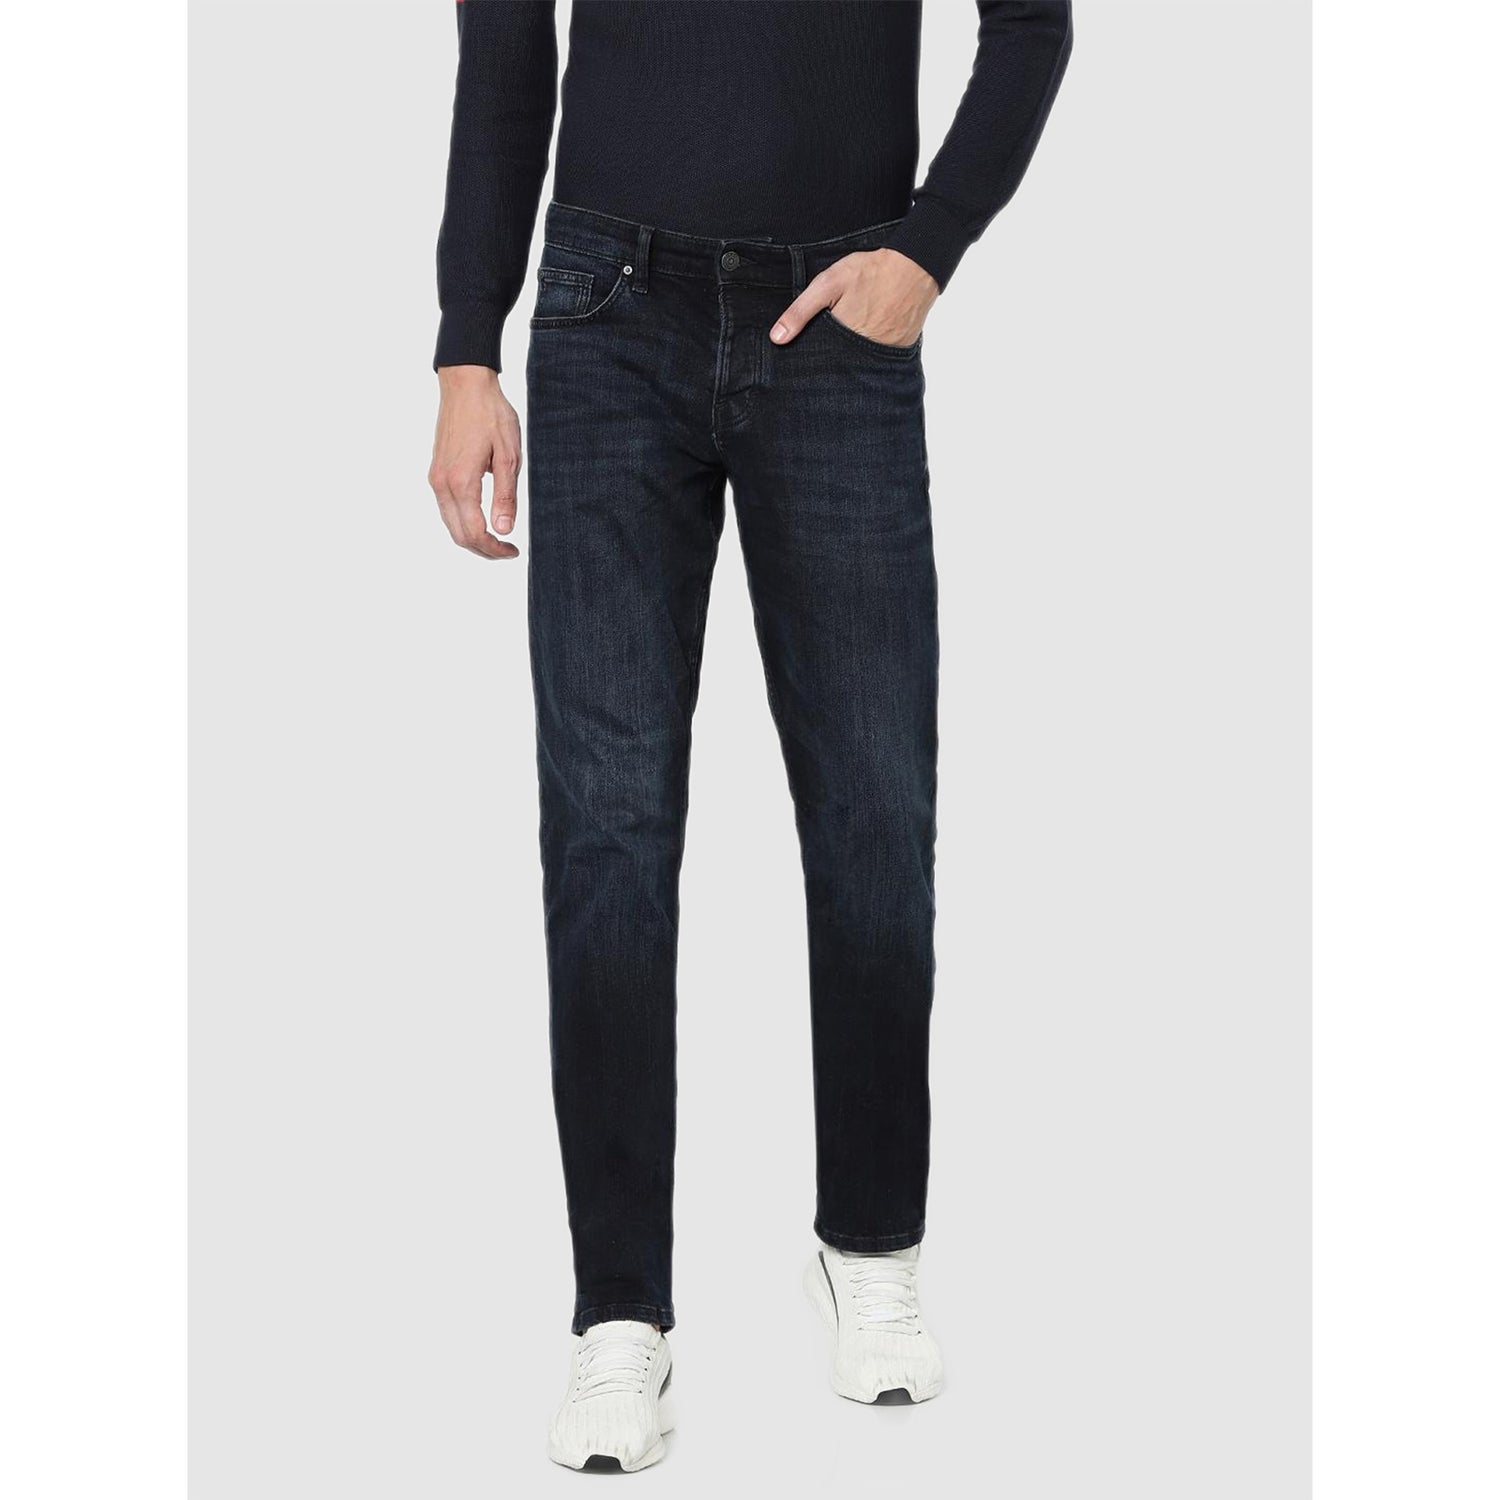 Navy Blue Slim Fit Light Fade Stretchable Jeans (NOBODY15)